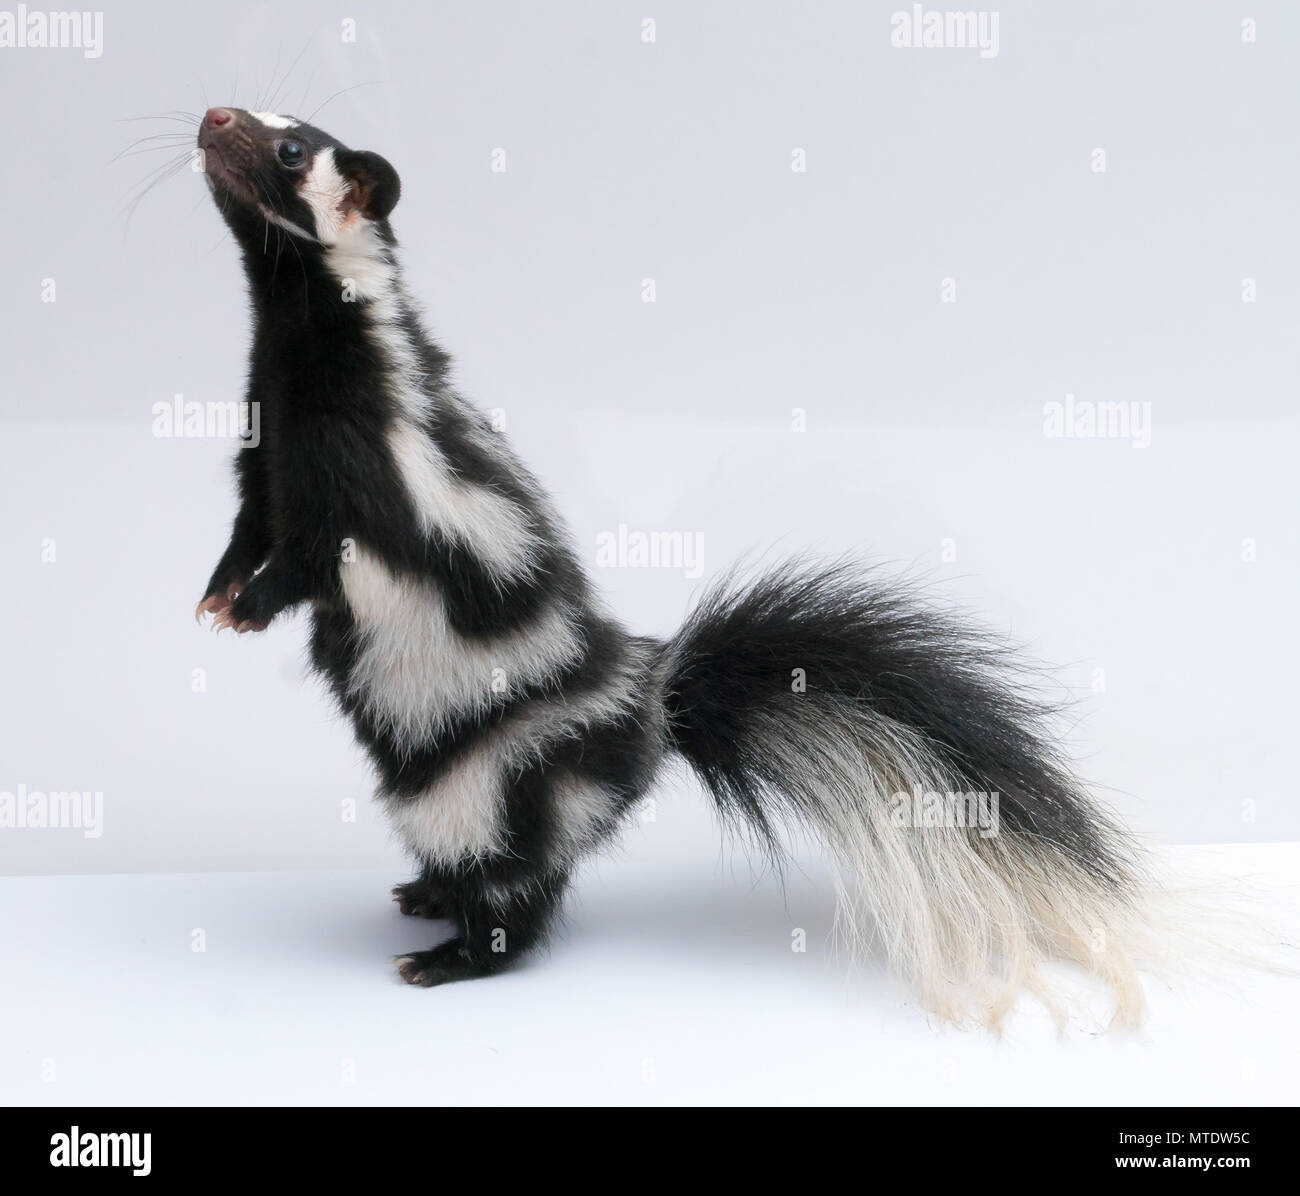 Spotted Skunk Isolated on White Background Paper Stock Photo